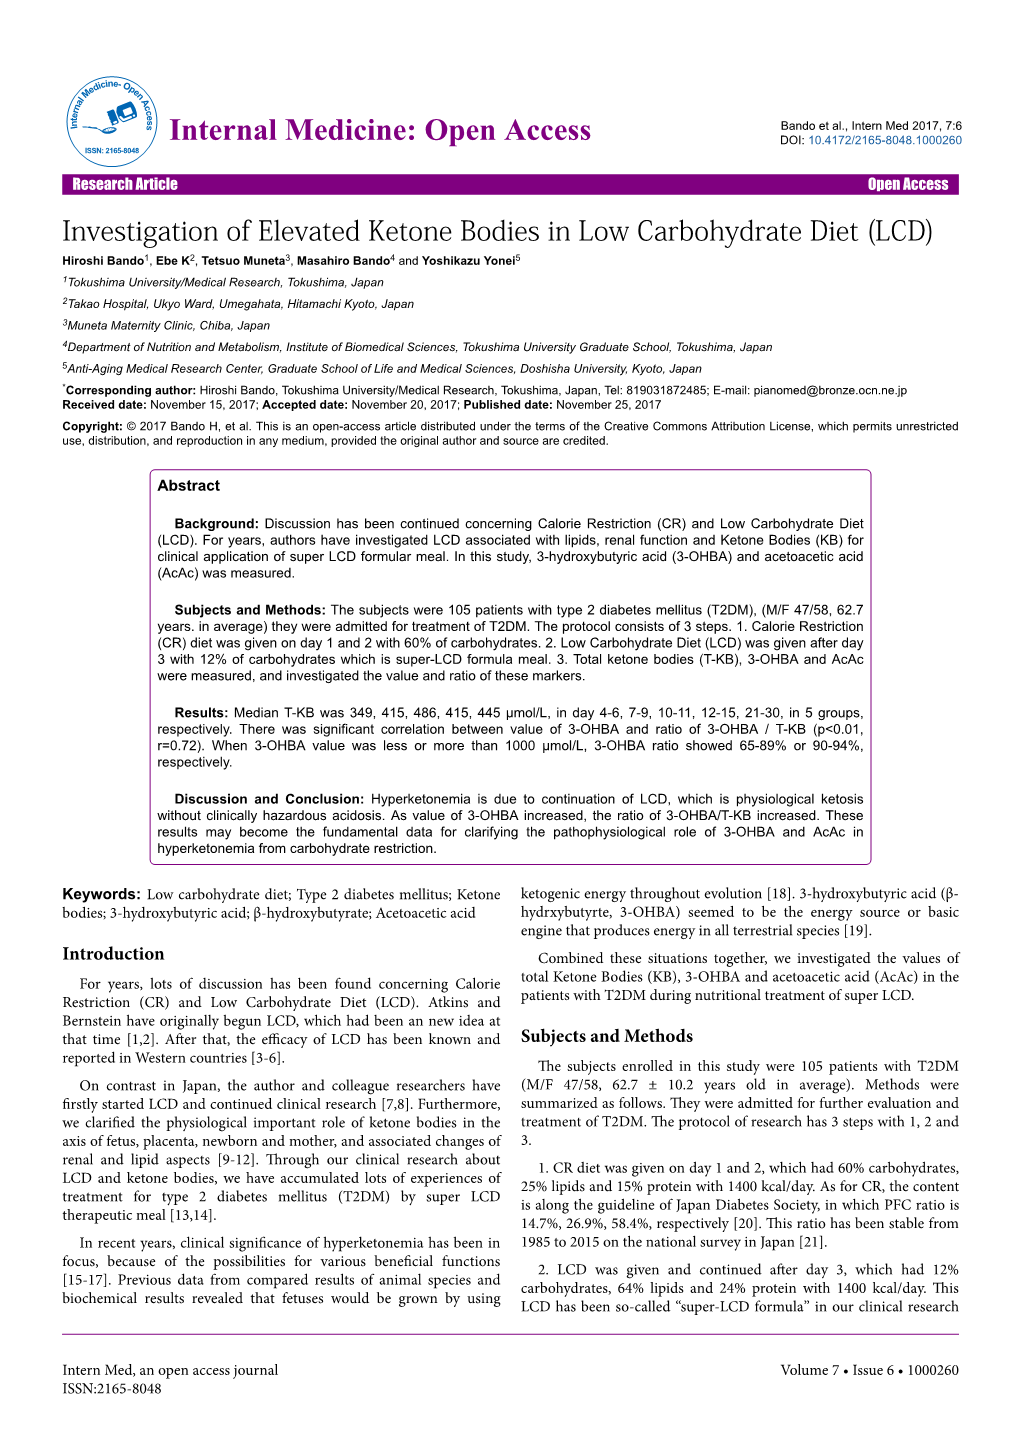 Investigation of Elevated Ketone Bodies In